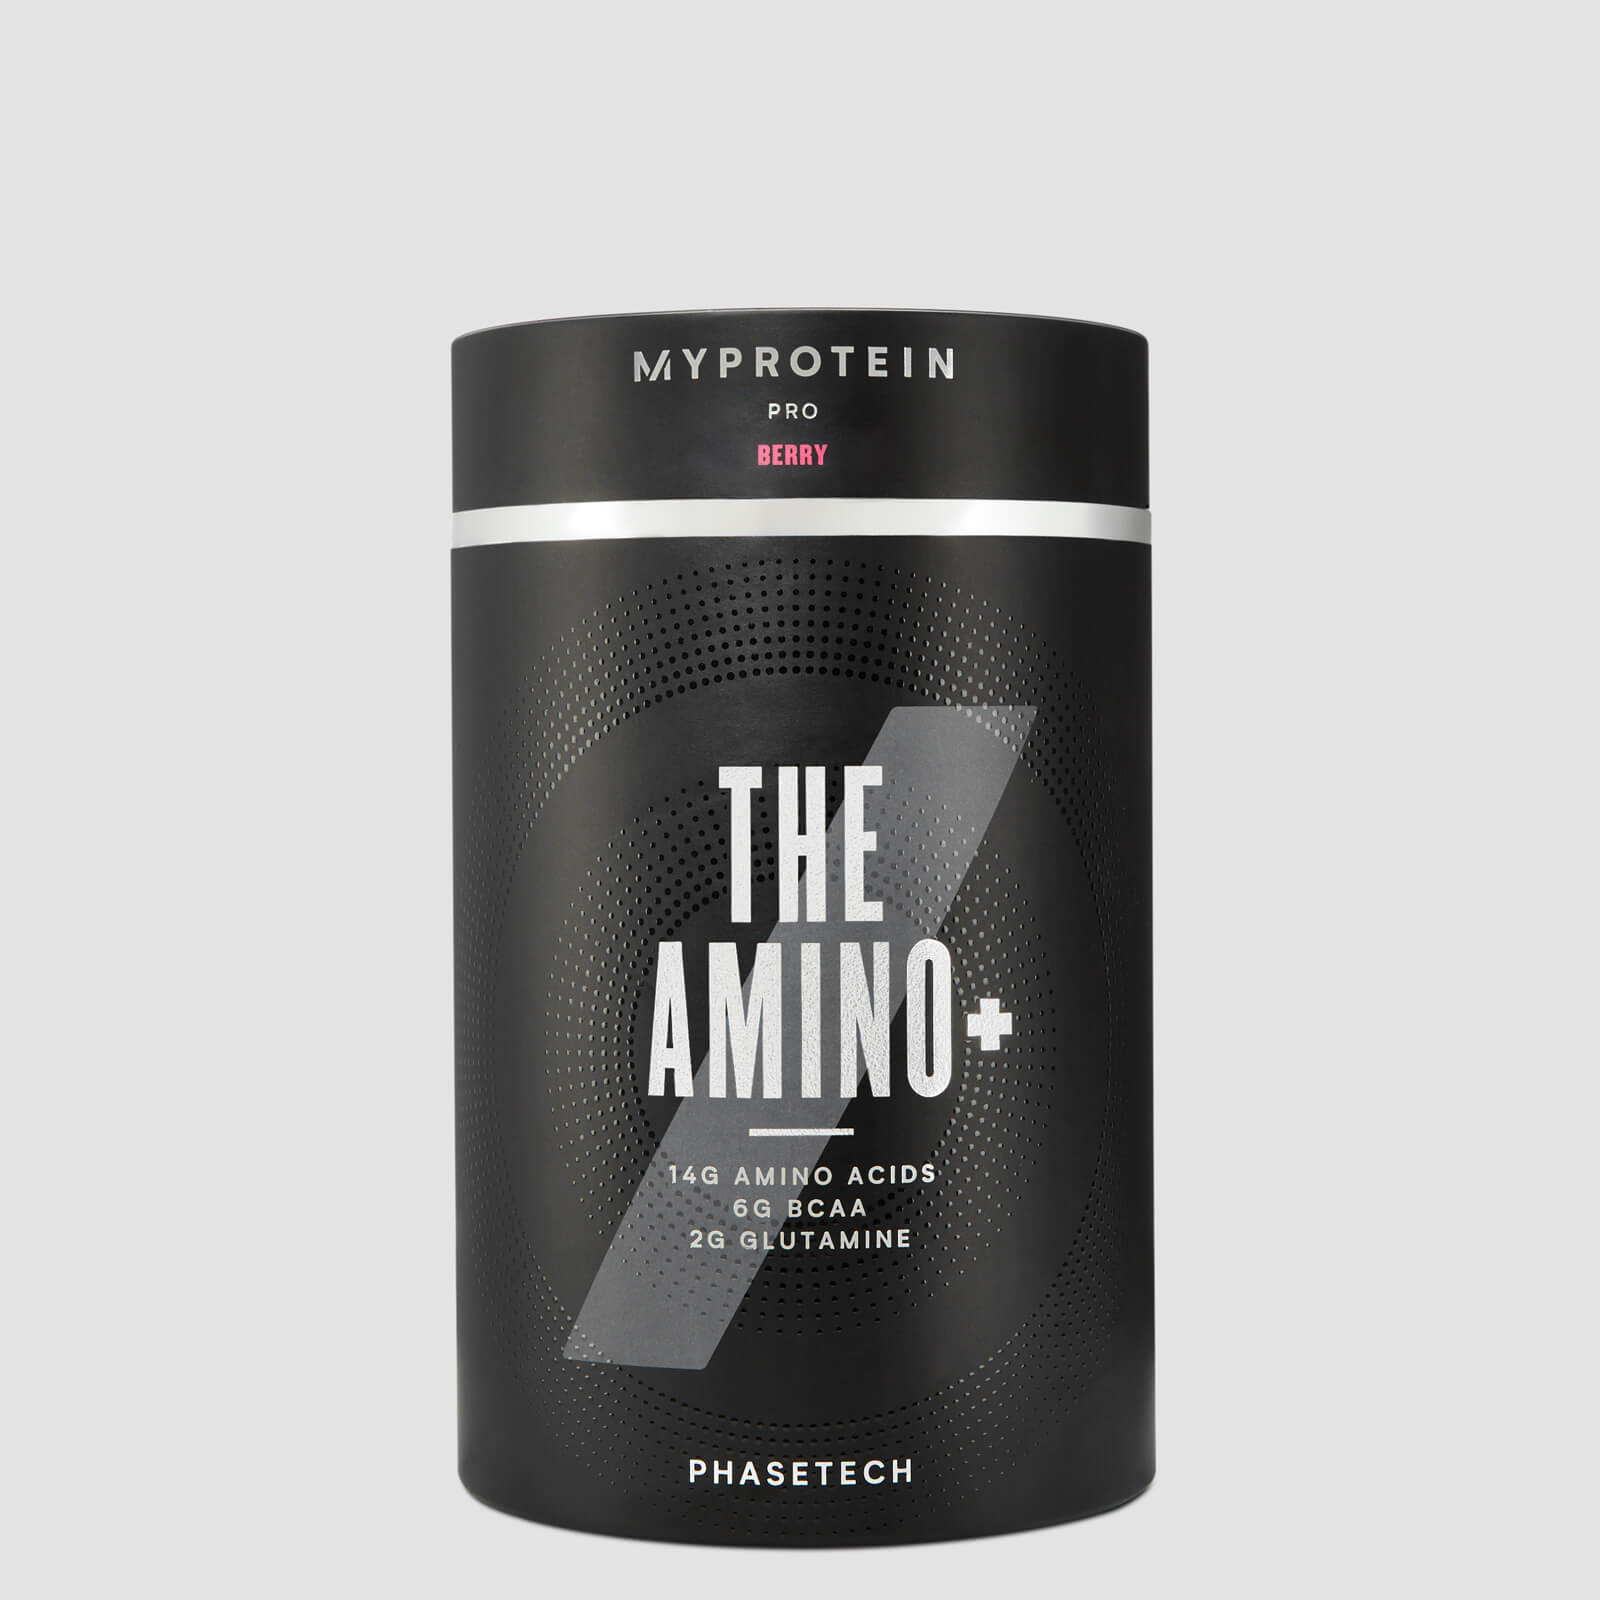 THE Amino+ - 20servings - Berry